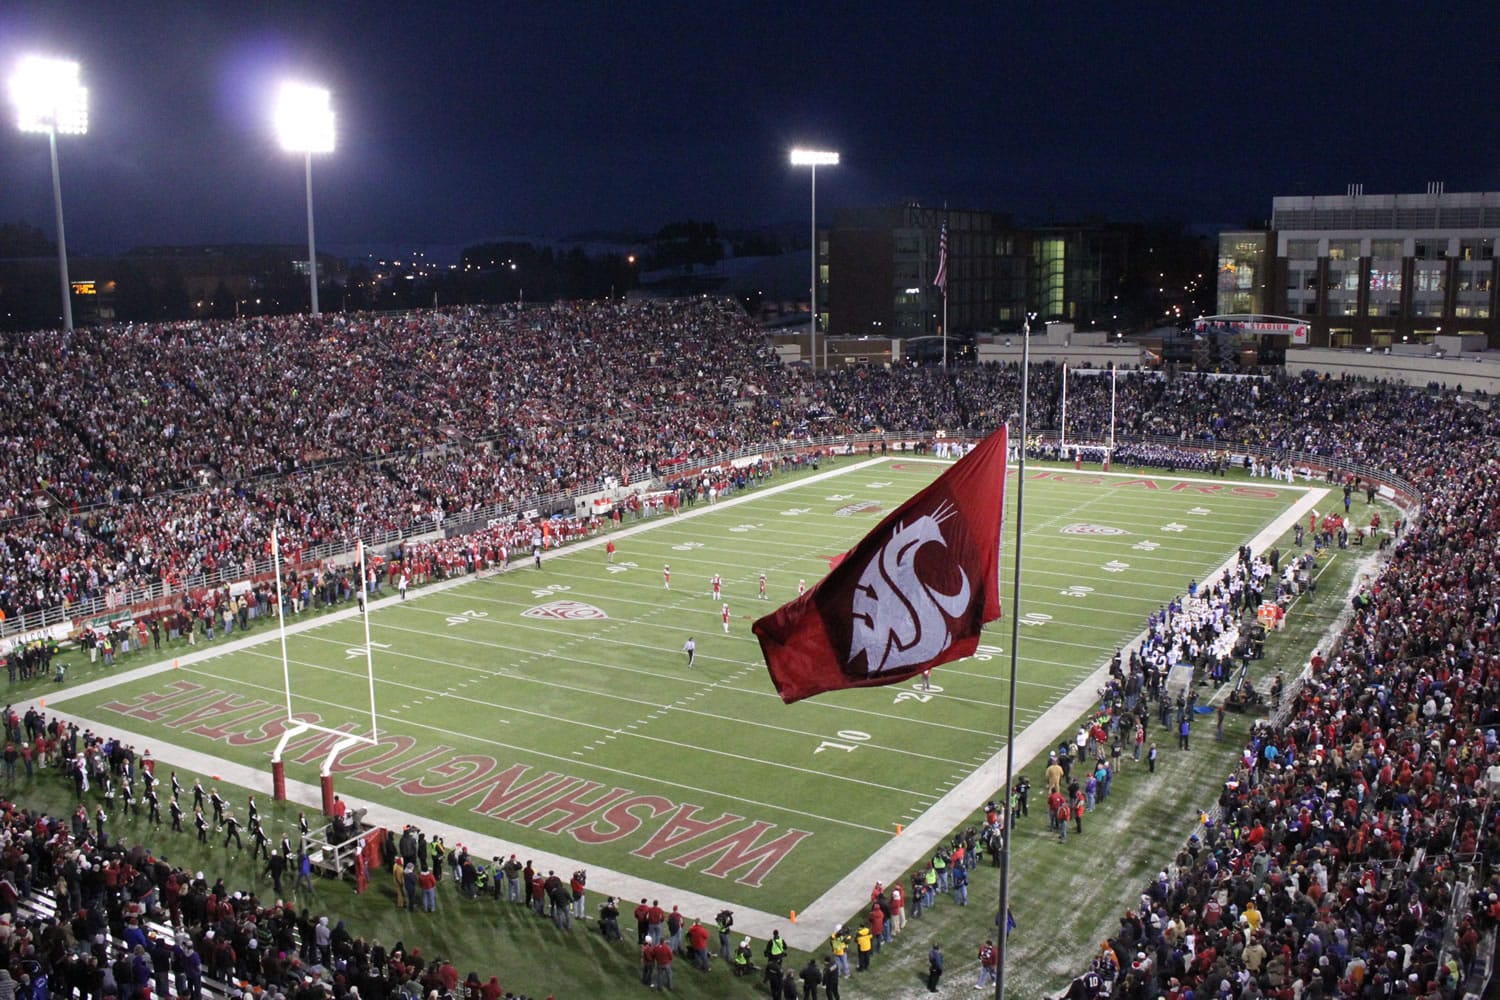 Martin Stadium in Pullman has a seating capacity of about 35,000, which is the smallest in the Pac-12.